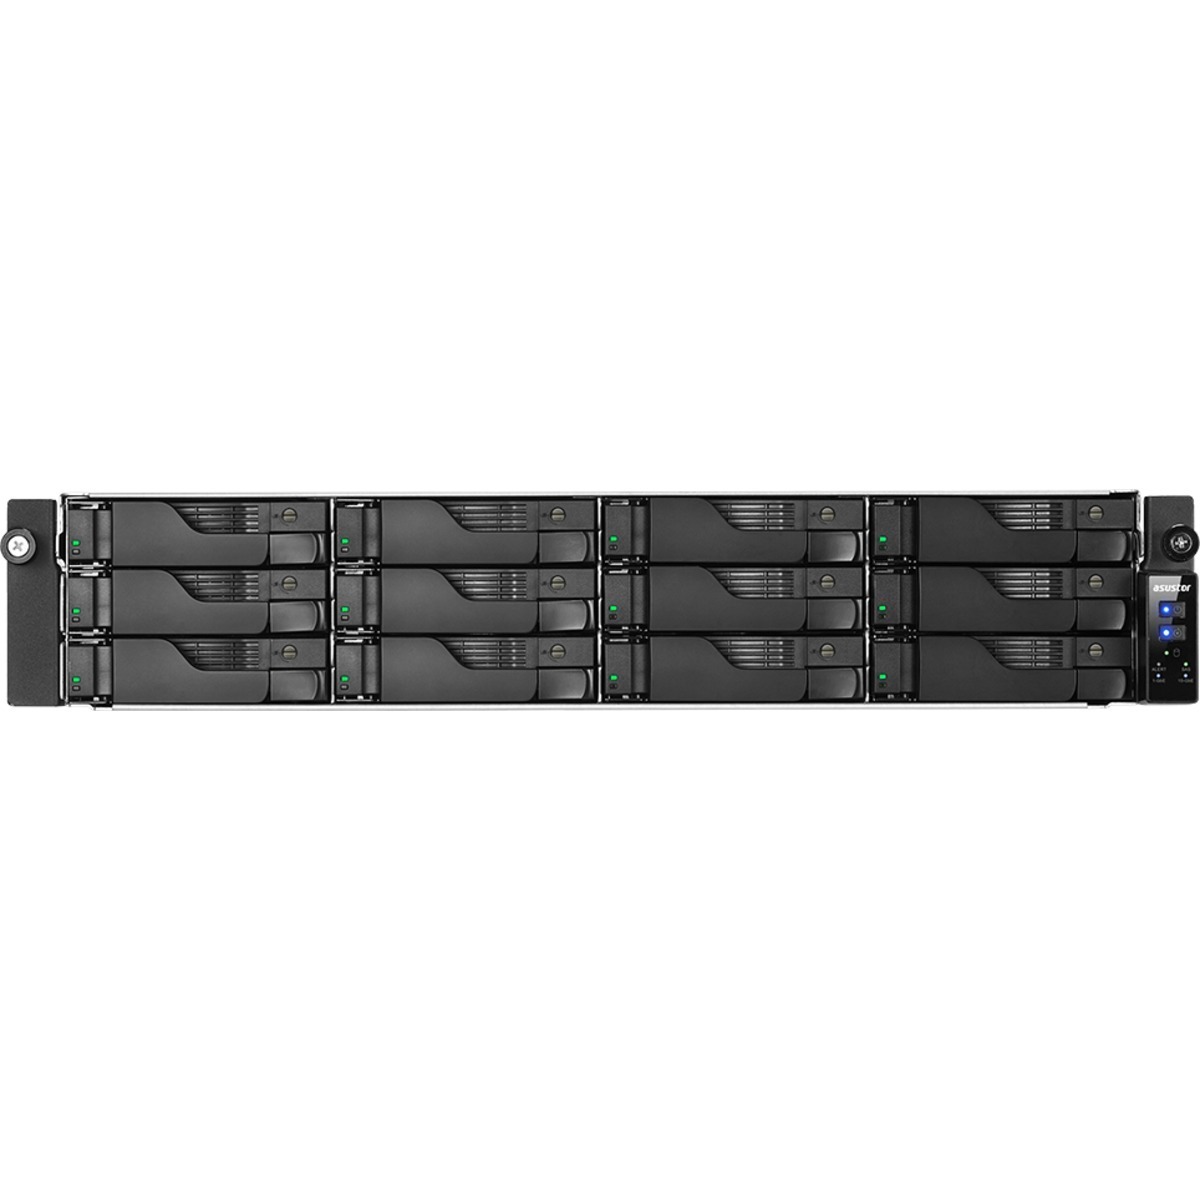 ASUSTOR AS7112RDX Lockerstor 12R Pro 36tb 12-Bay RackMount Large Business / Enterprise NAS - Network Attached Storage Device 9x4tb Seagate EXOS 7E10 ST4000NM024B 3.5 7200rpm SATA 6Gb/s HDD ENTERPRISE Class Drives Installed - Burn-In Tested AS7112RDX Lockerstor 12R Pro